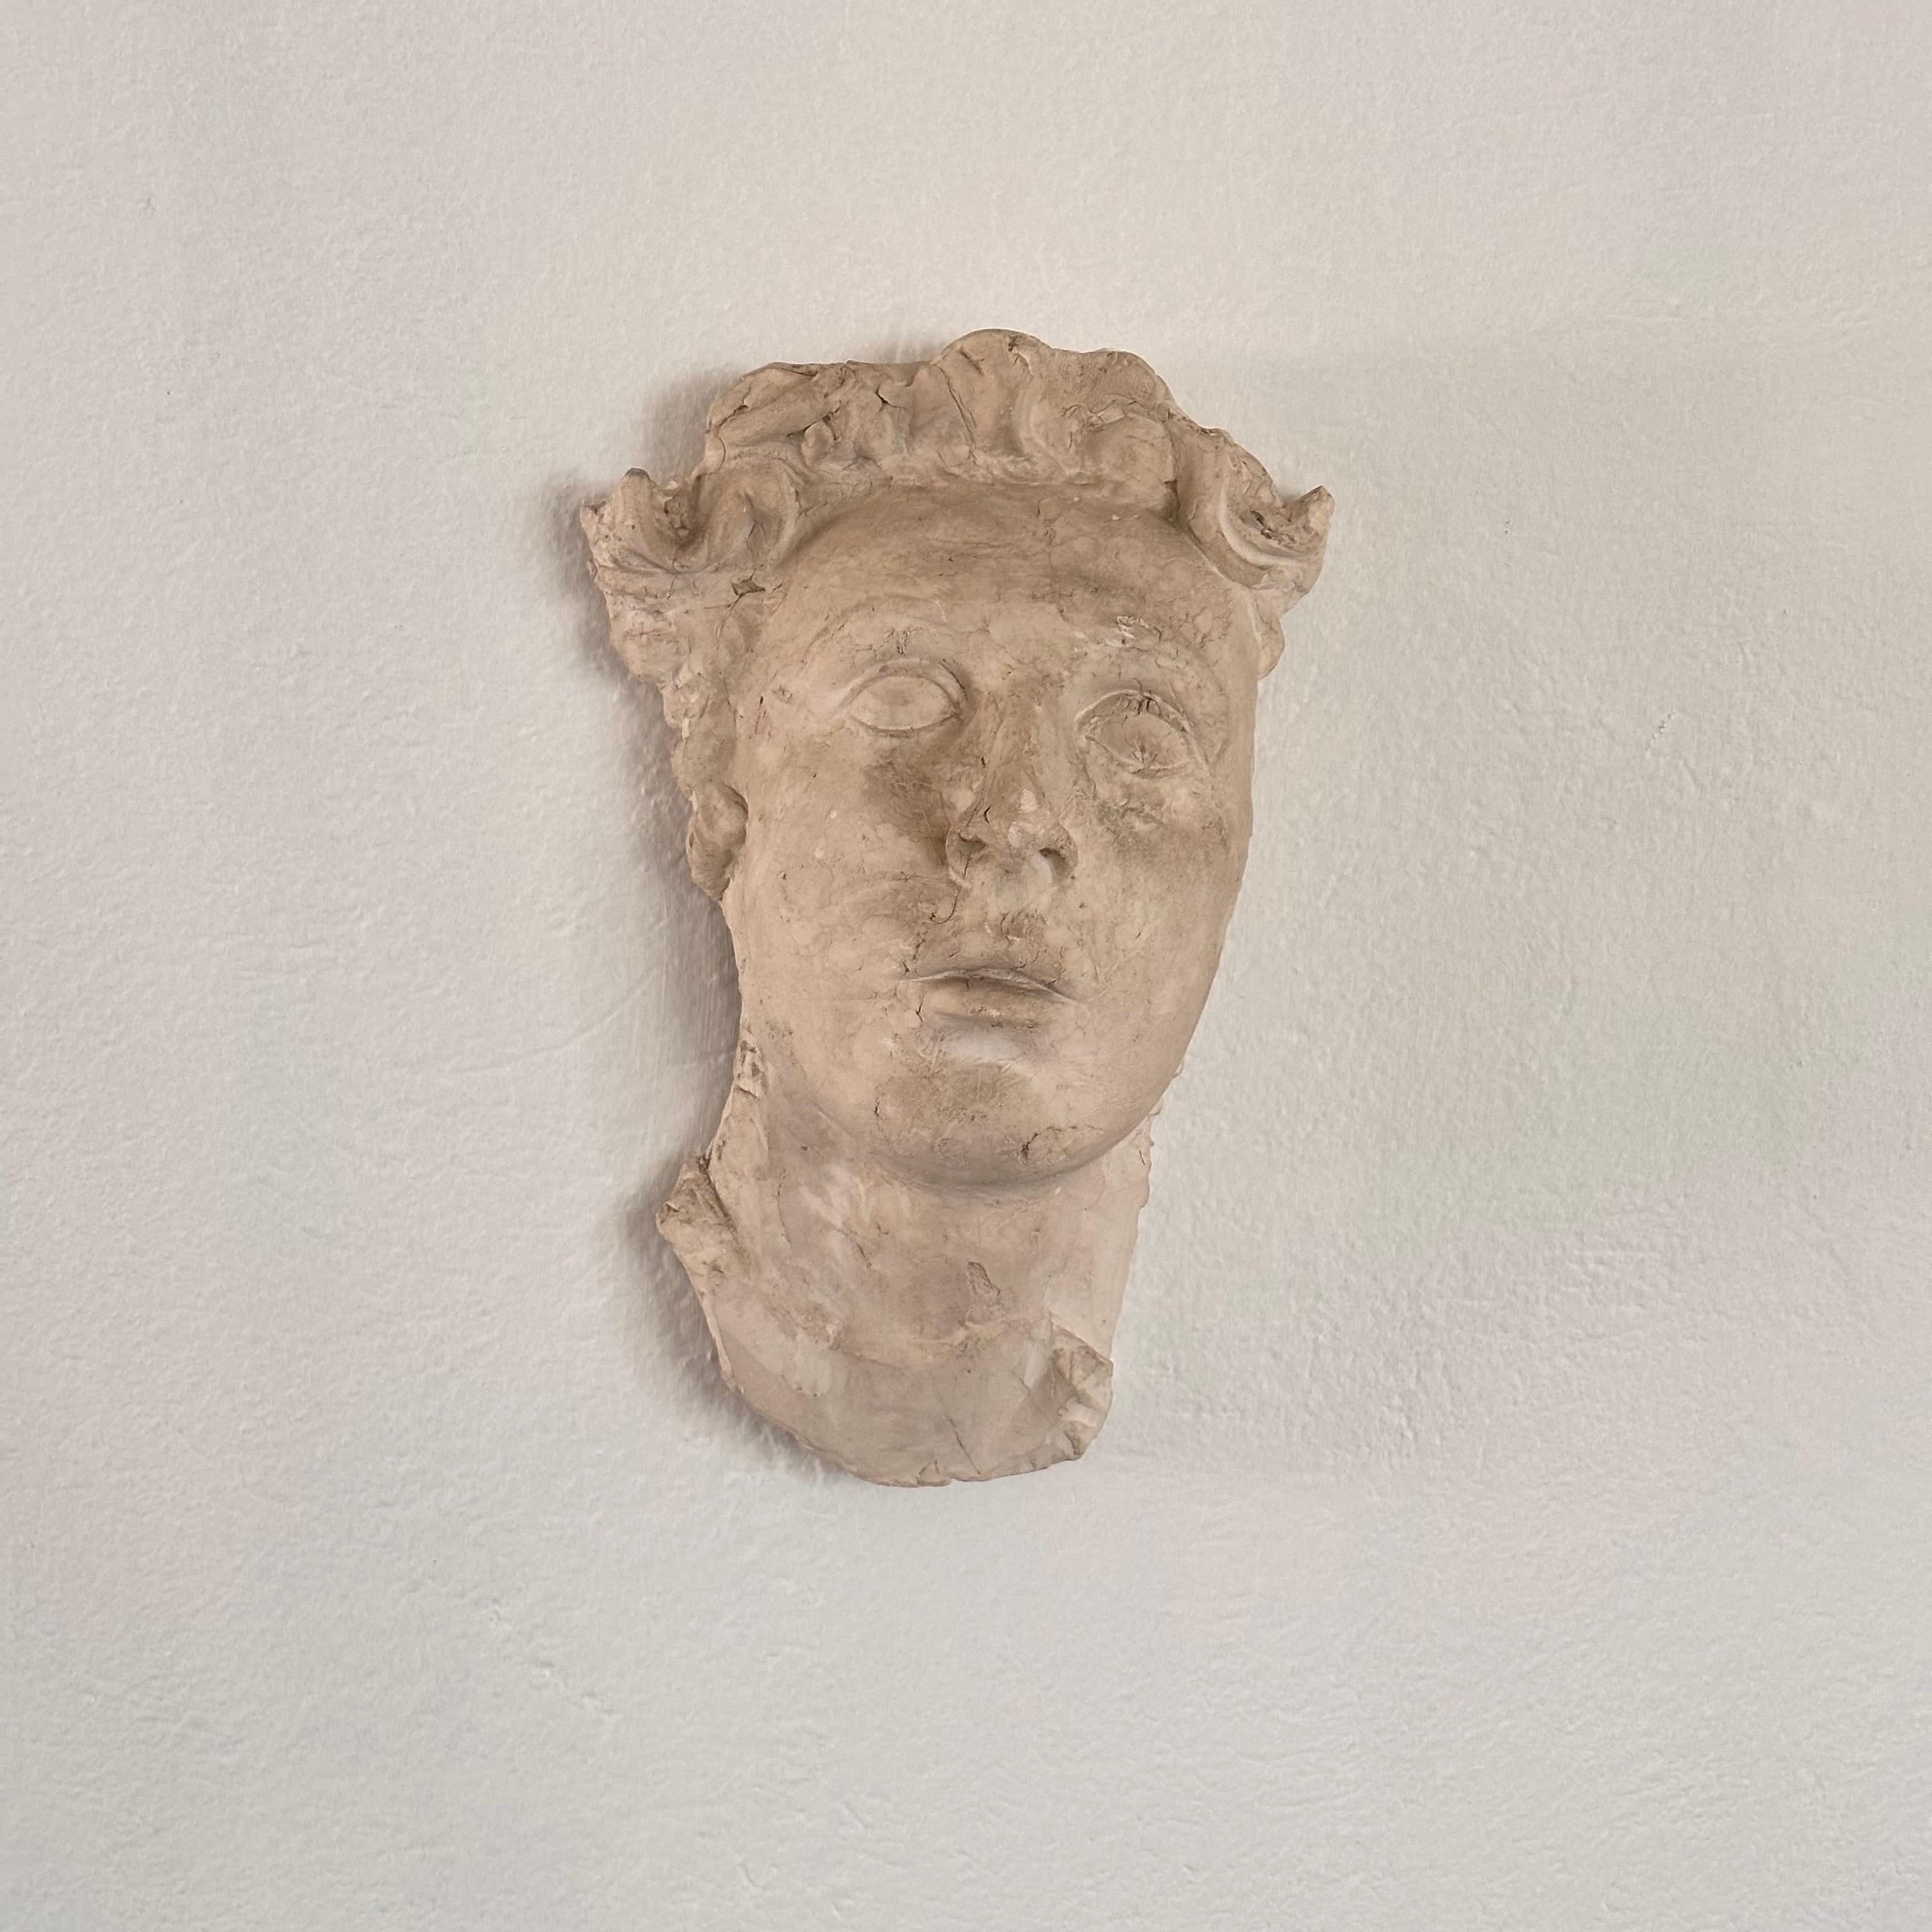 Stunning Decorative Roman Gypsum Face, 1970s Reproduction For Sale 5